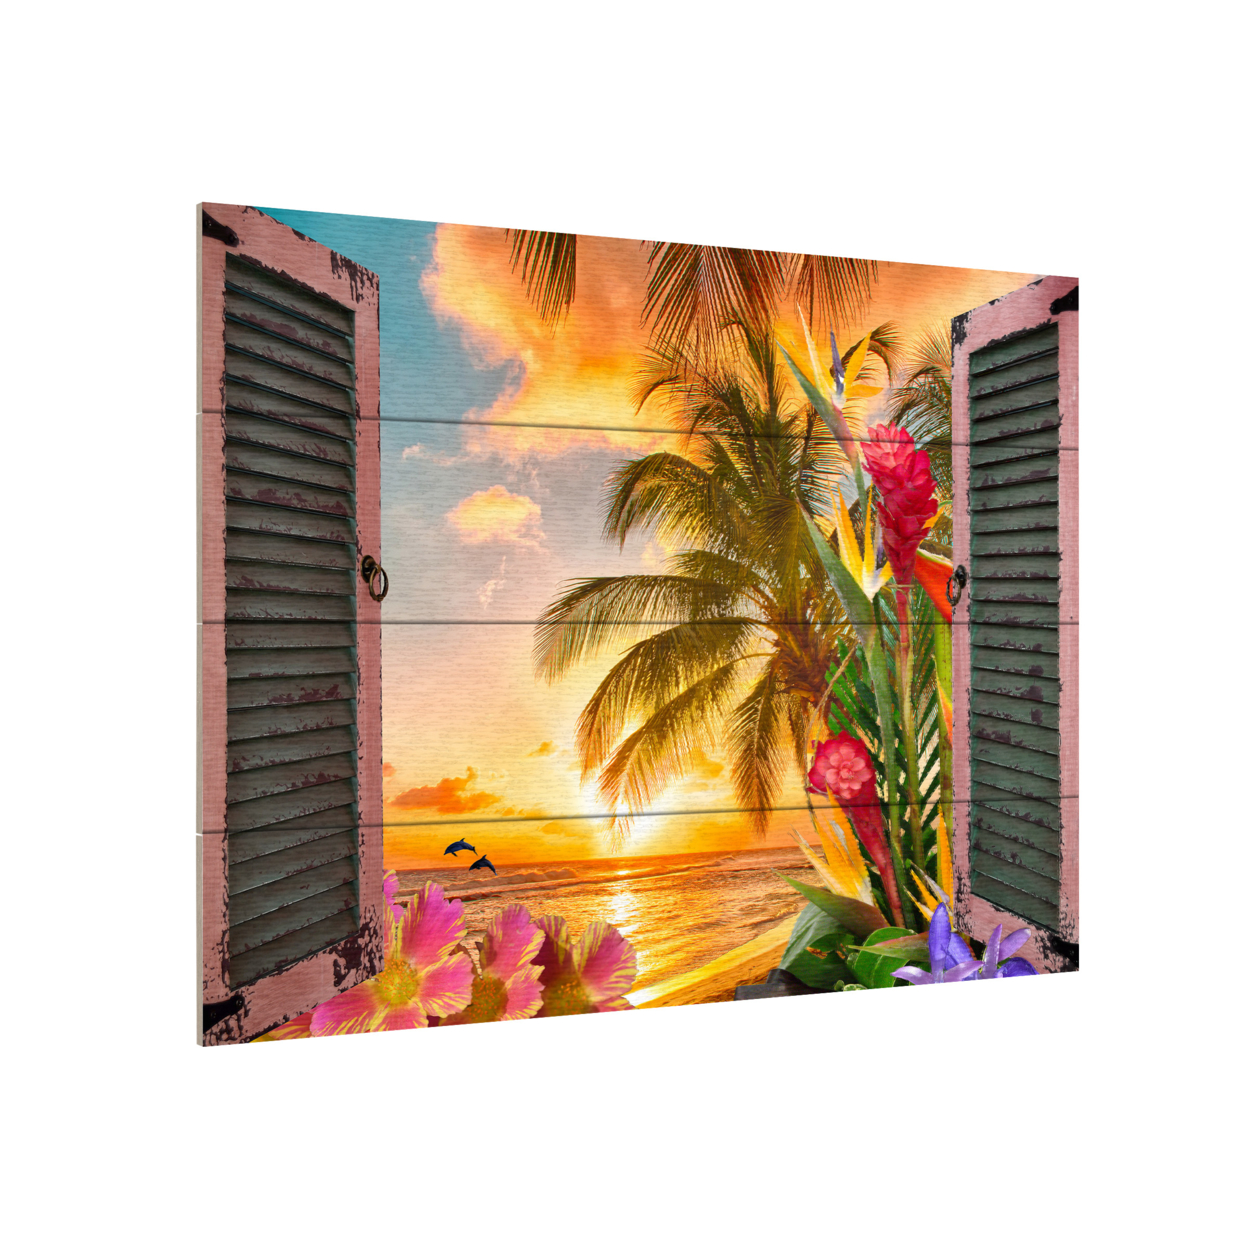 Wall Art 12 X 16 Inches Titled Window To Paradise II Ready To Hang Printed On Wooden Planks